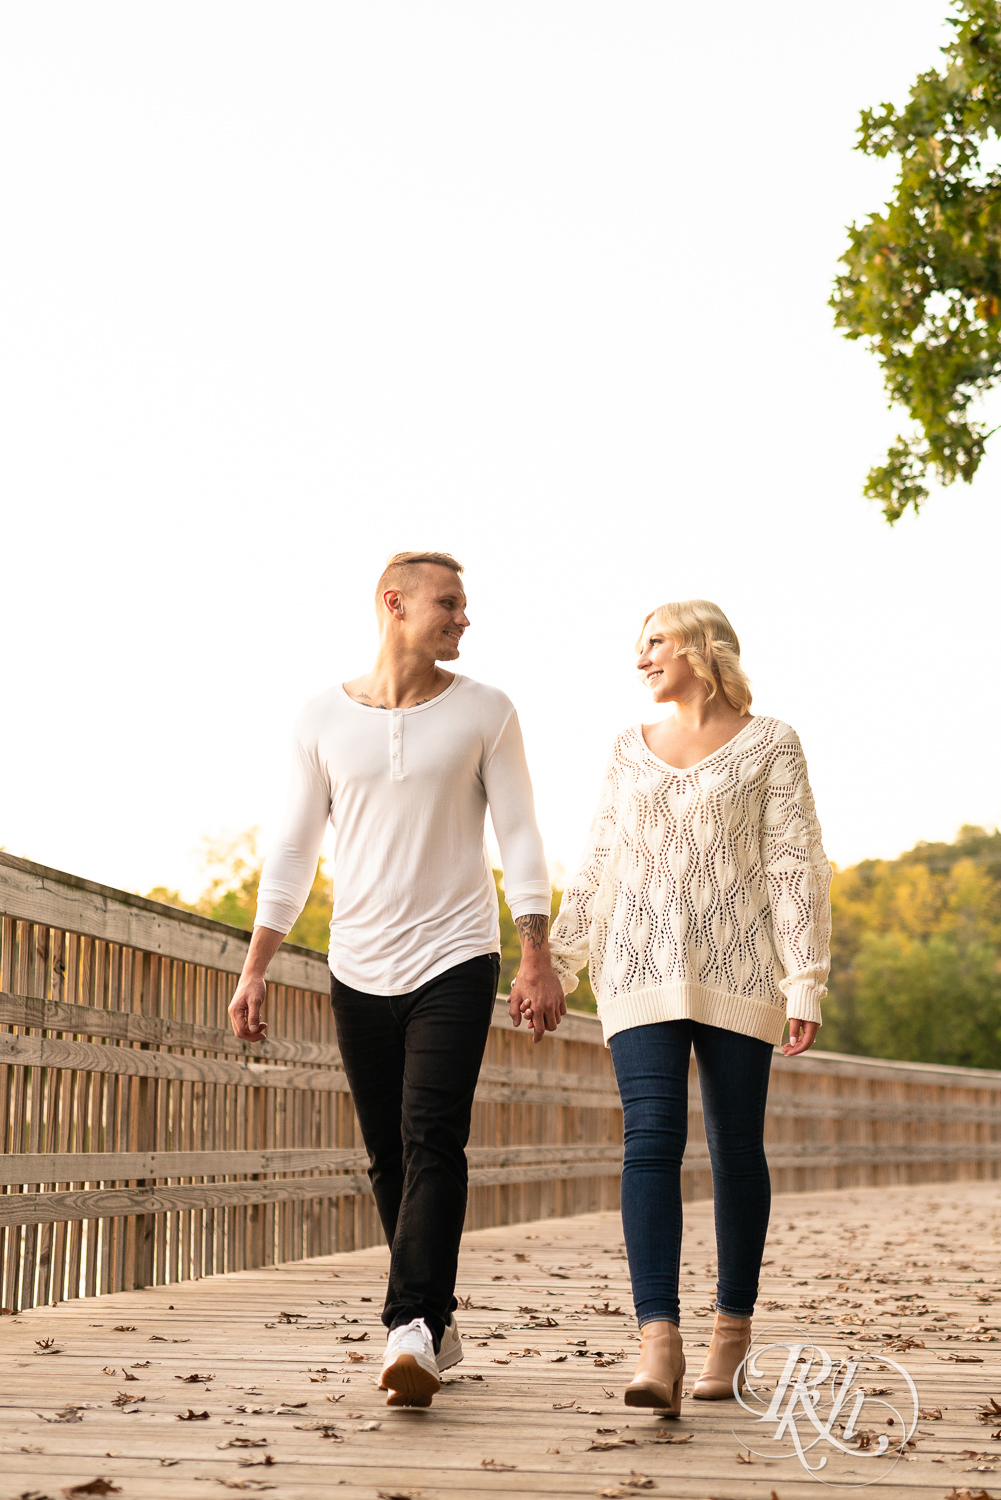 Blond woman and man in white shirts and jeans walk on bridge during sunset engagement photos at Lebanon Hills Regional Park in Eagan, Minnesota.